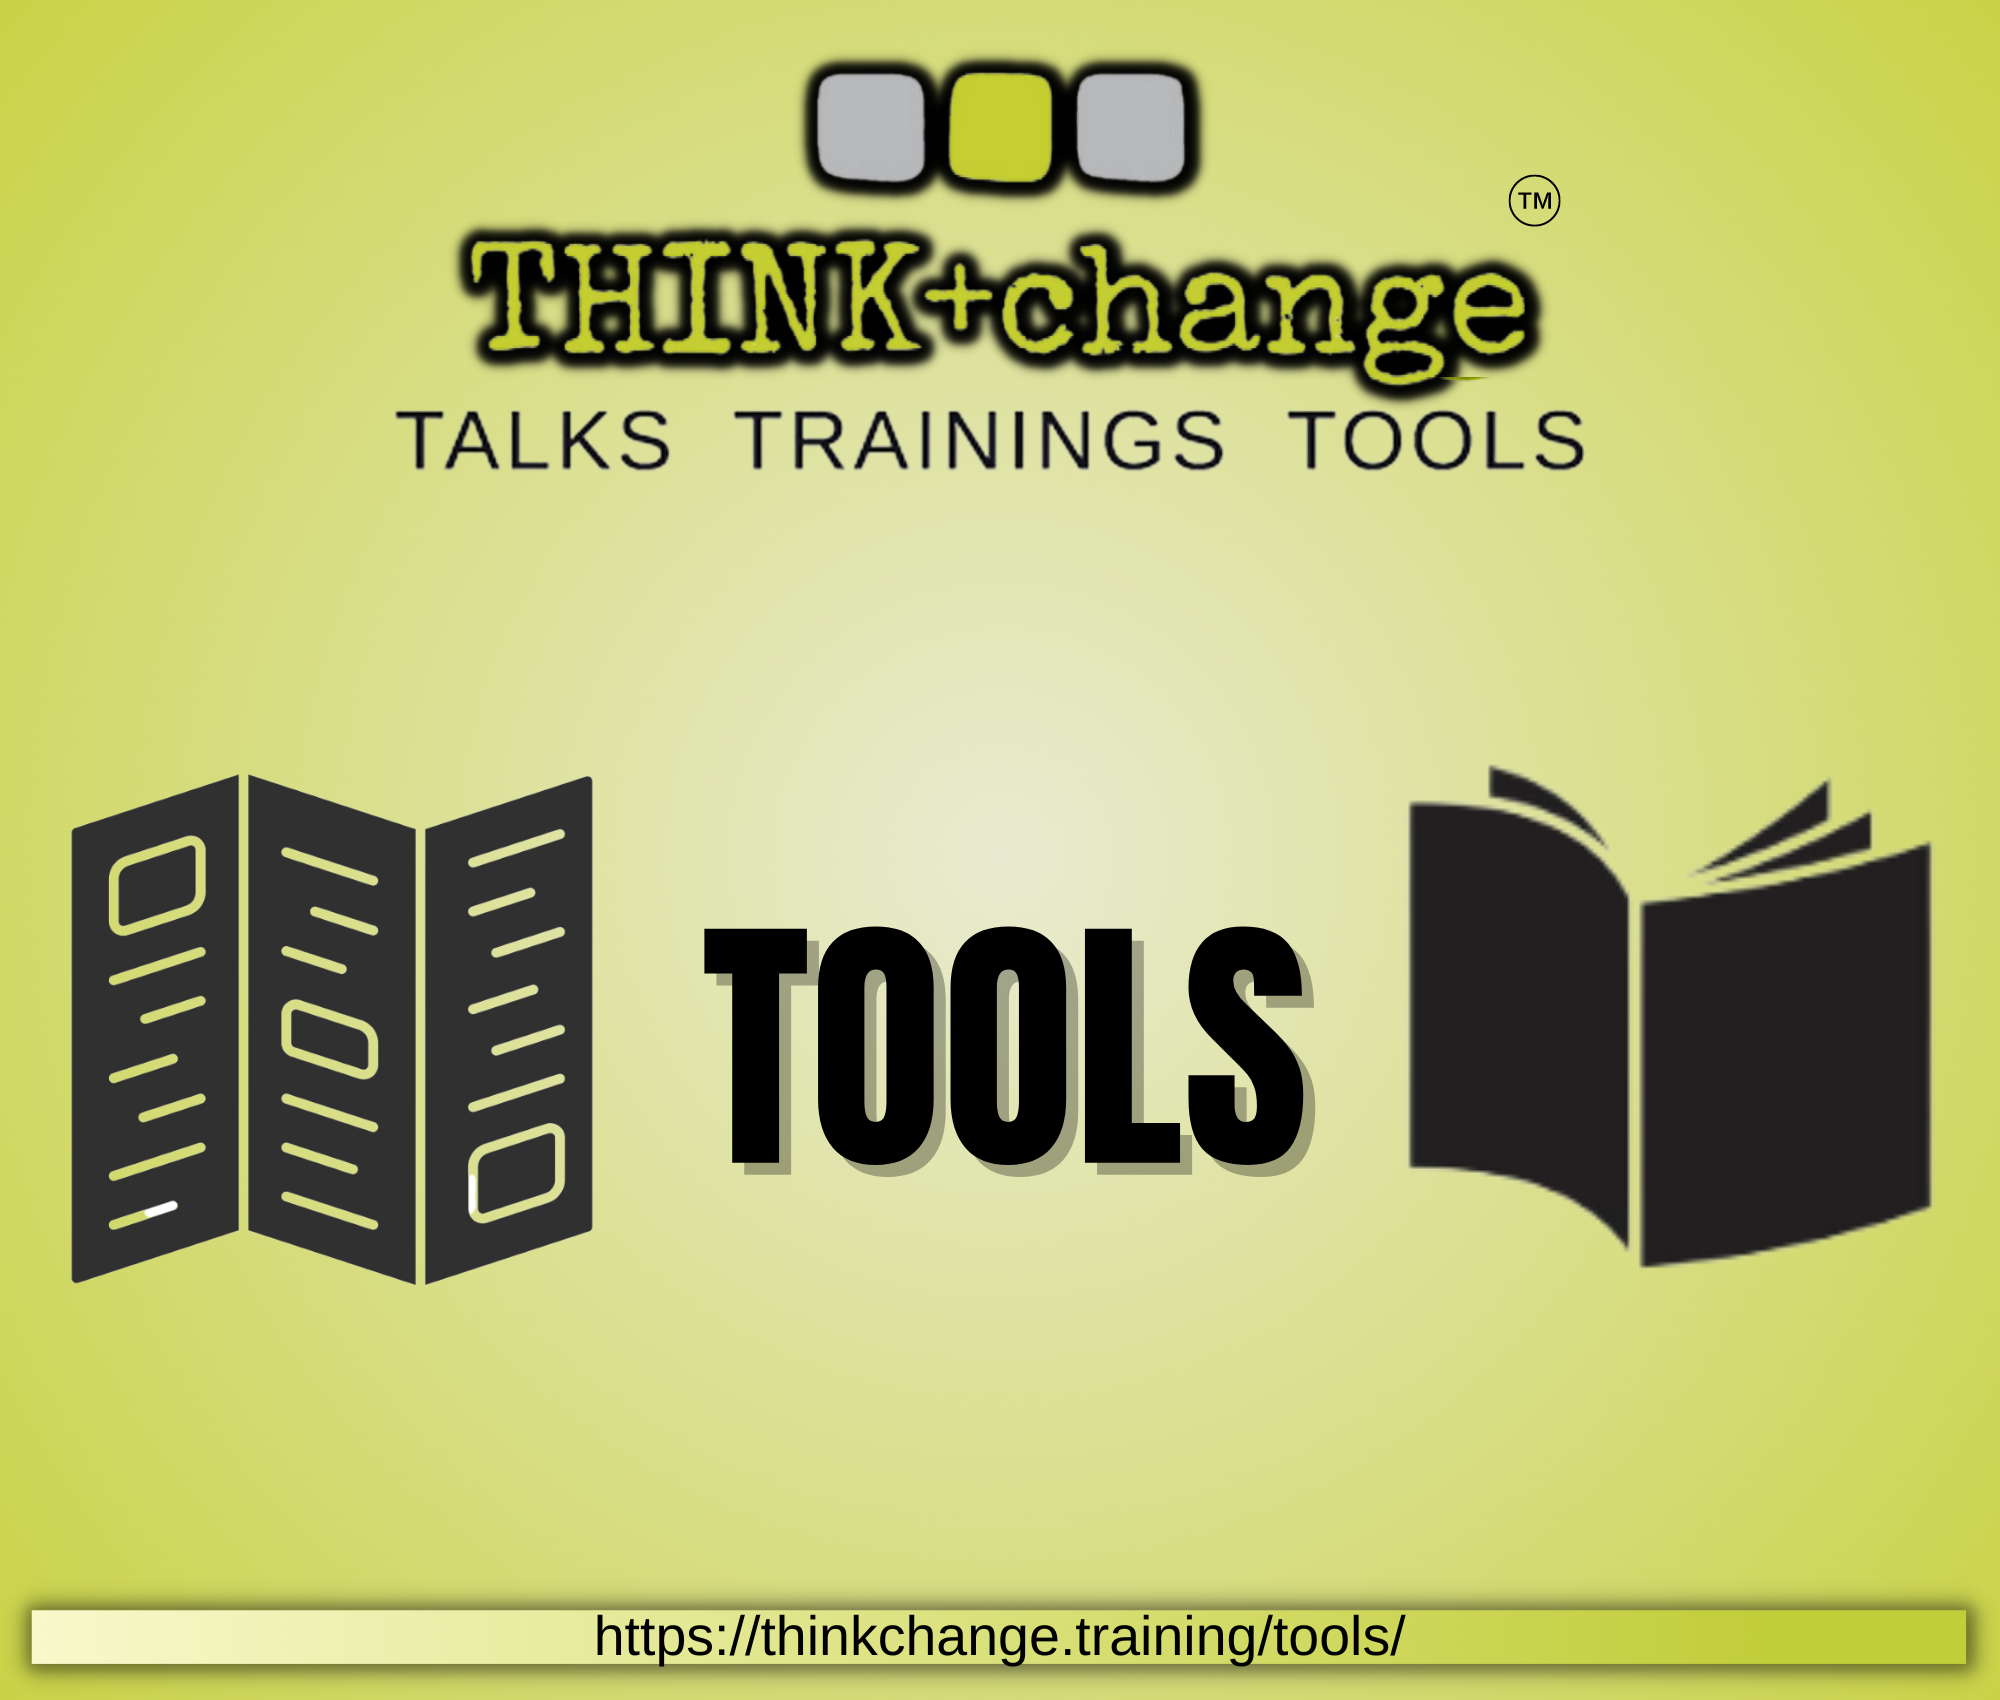 Green background with a logo that reads THINK+change TALKS, TRAININGS, TOOLS. Clip art of 2 books featured with the word that says TOOLS in the middle